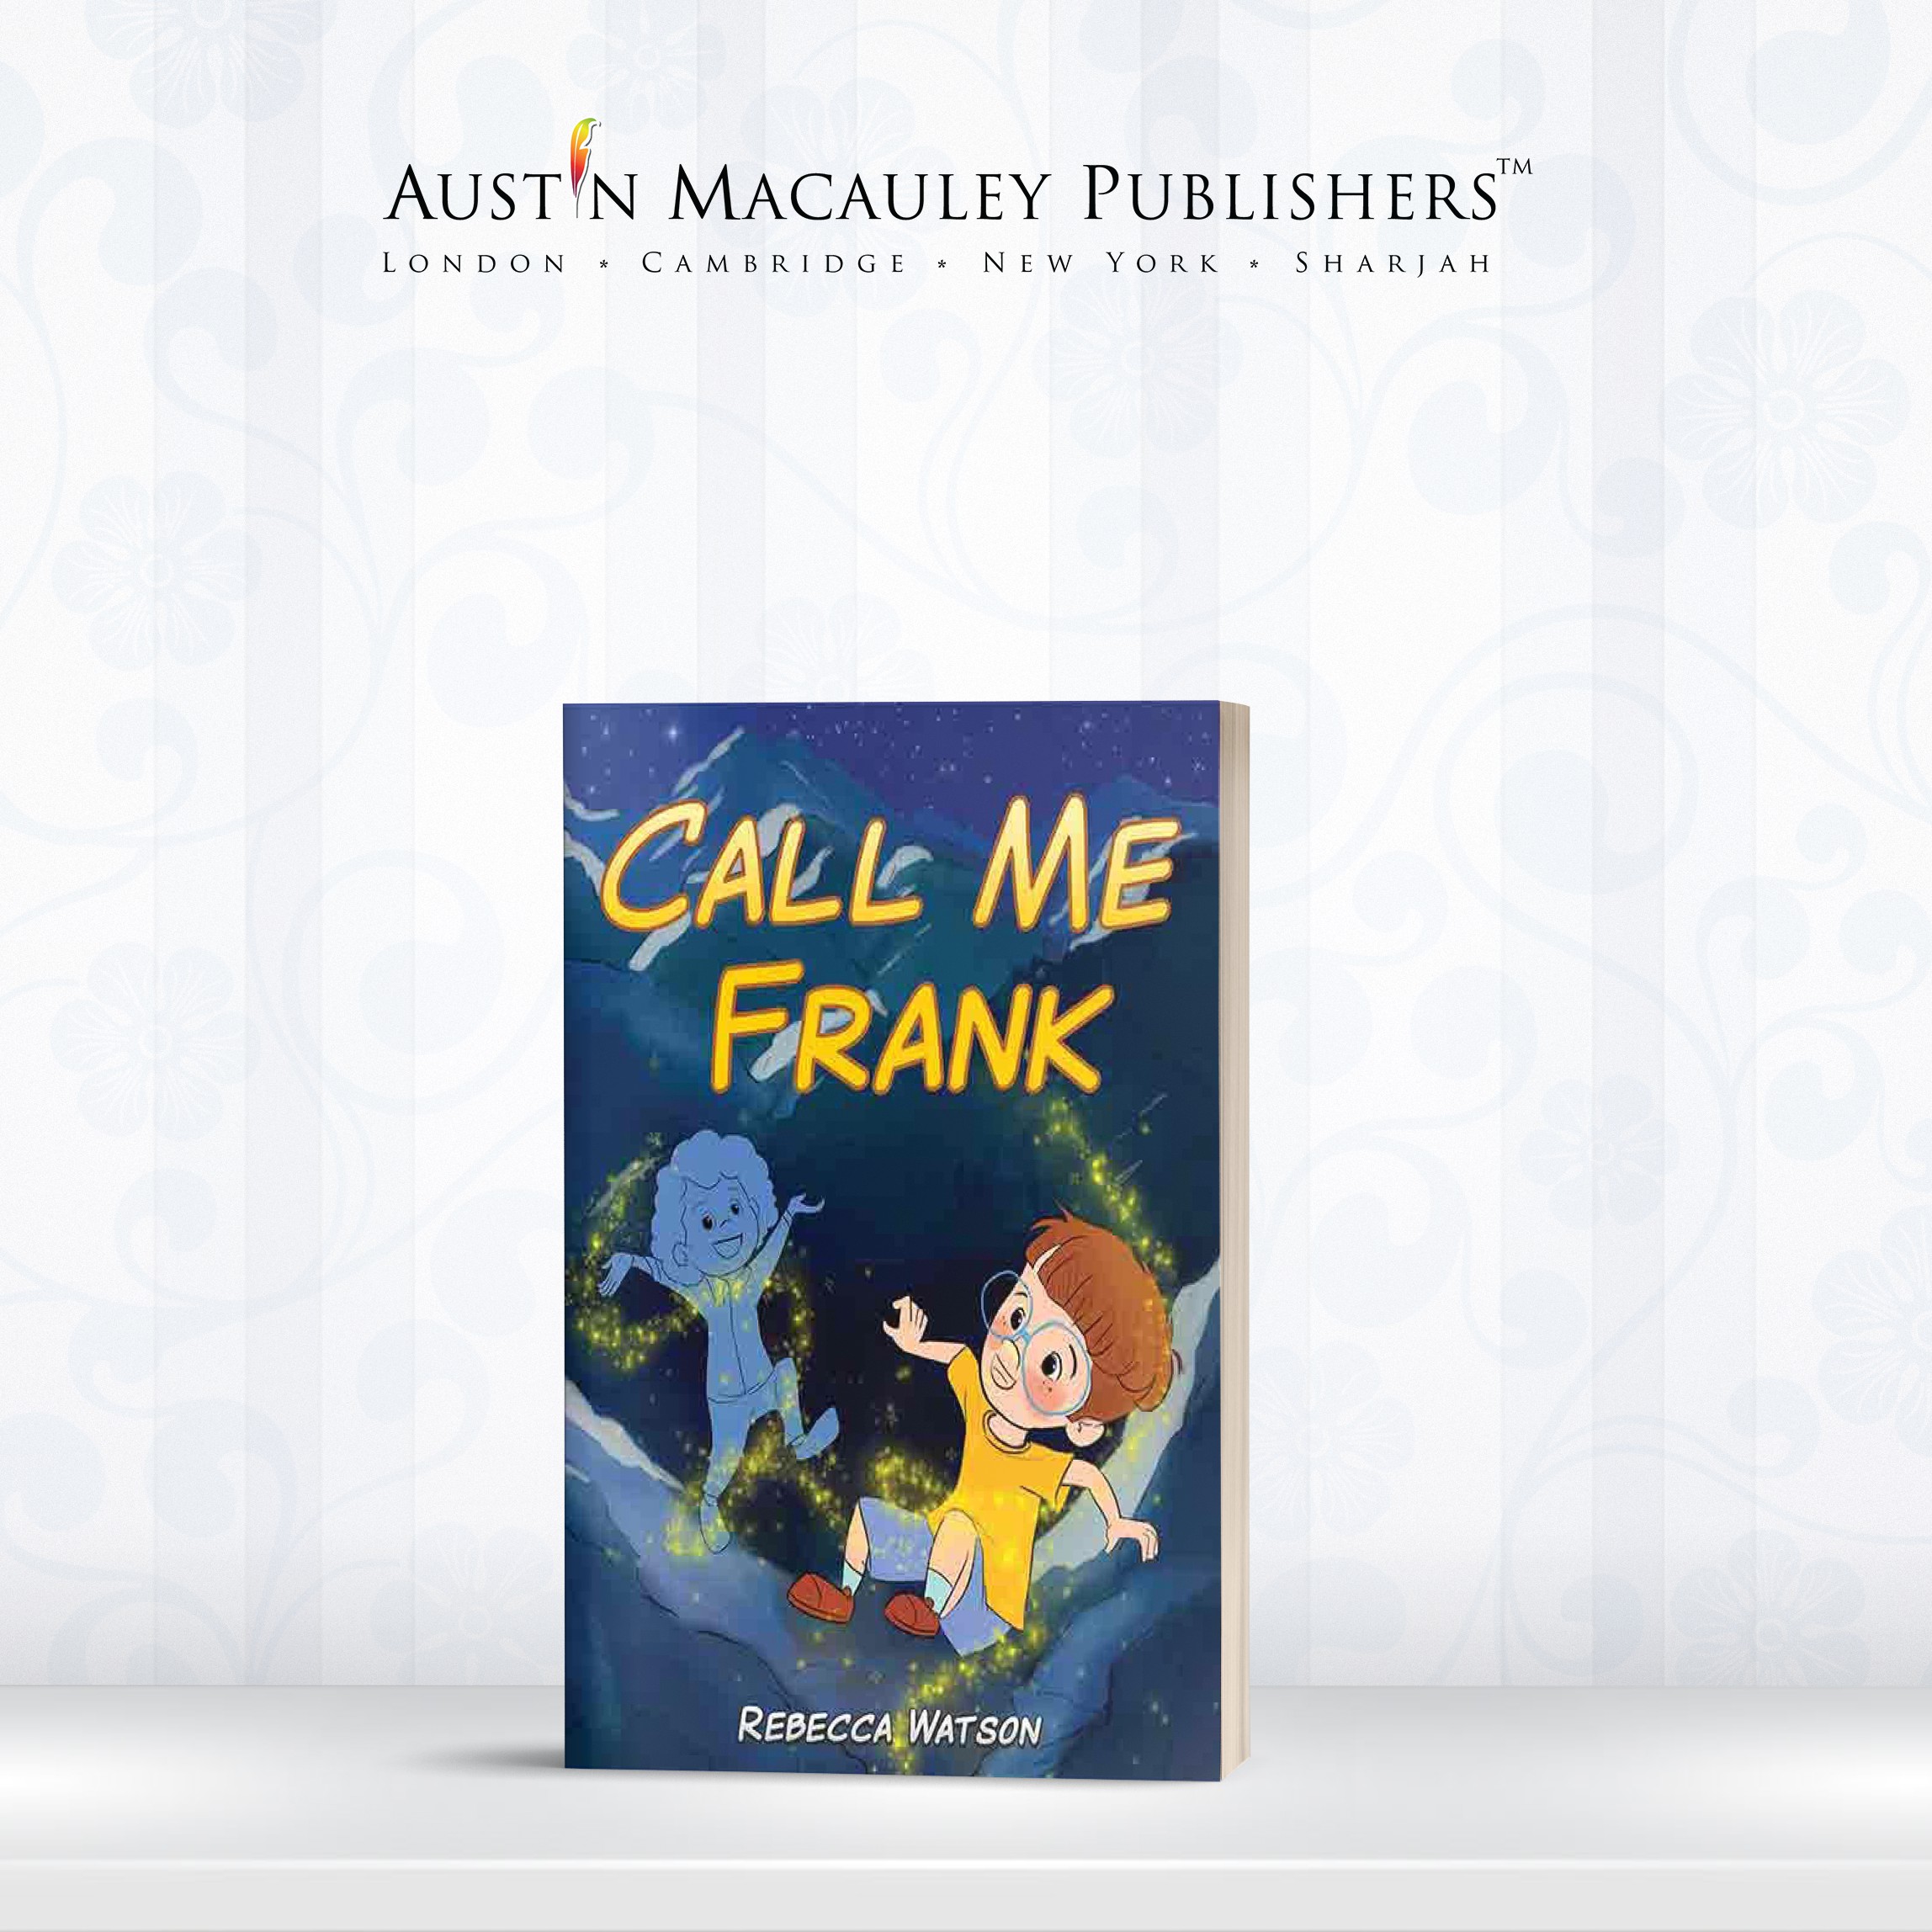 The Border Watch Featured Rebecca Watson’s ‘Call Me Frank’